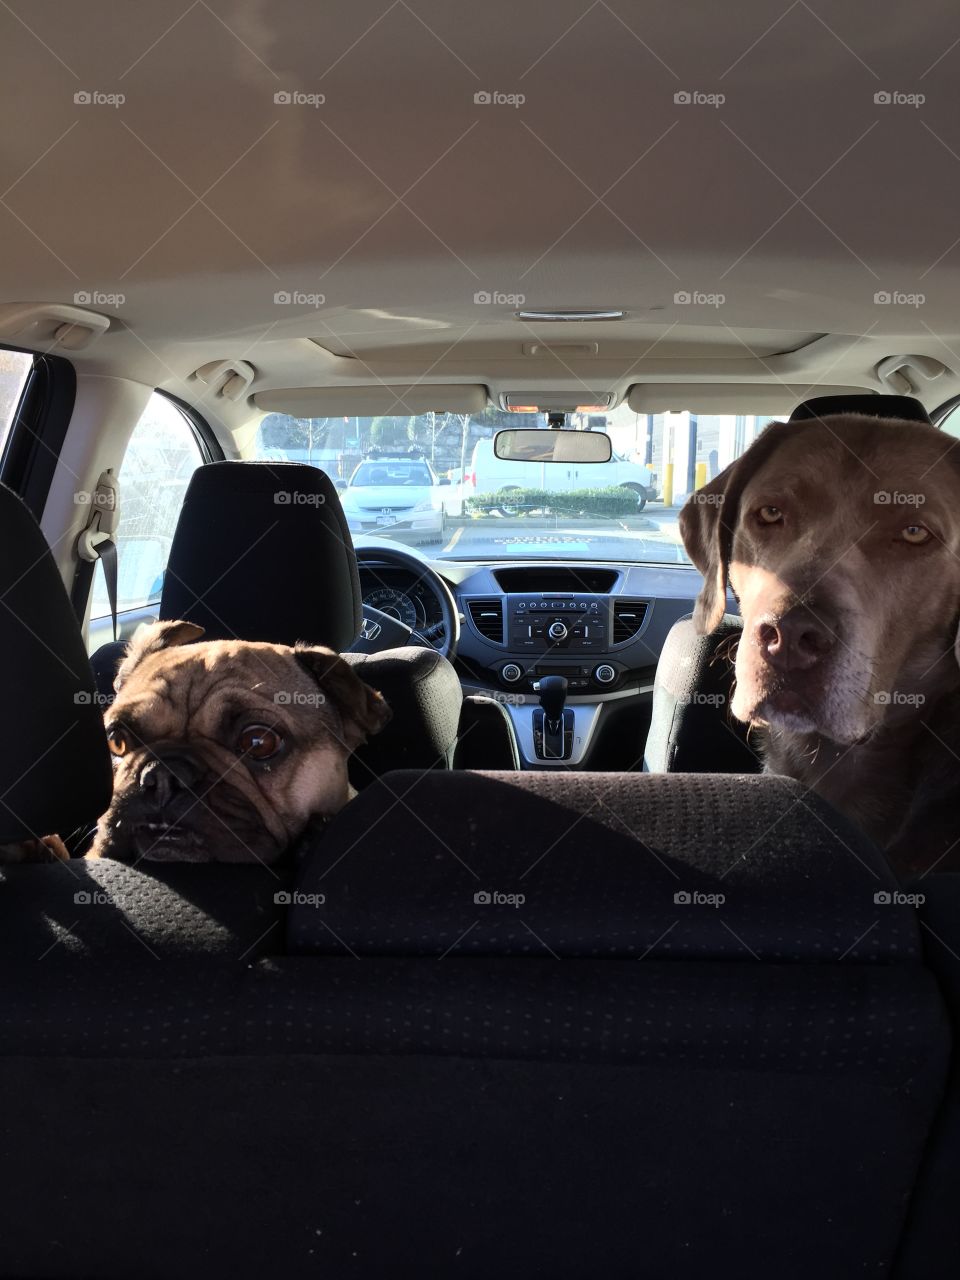 Are we there yet ?